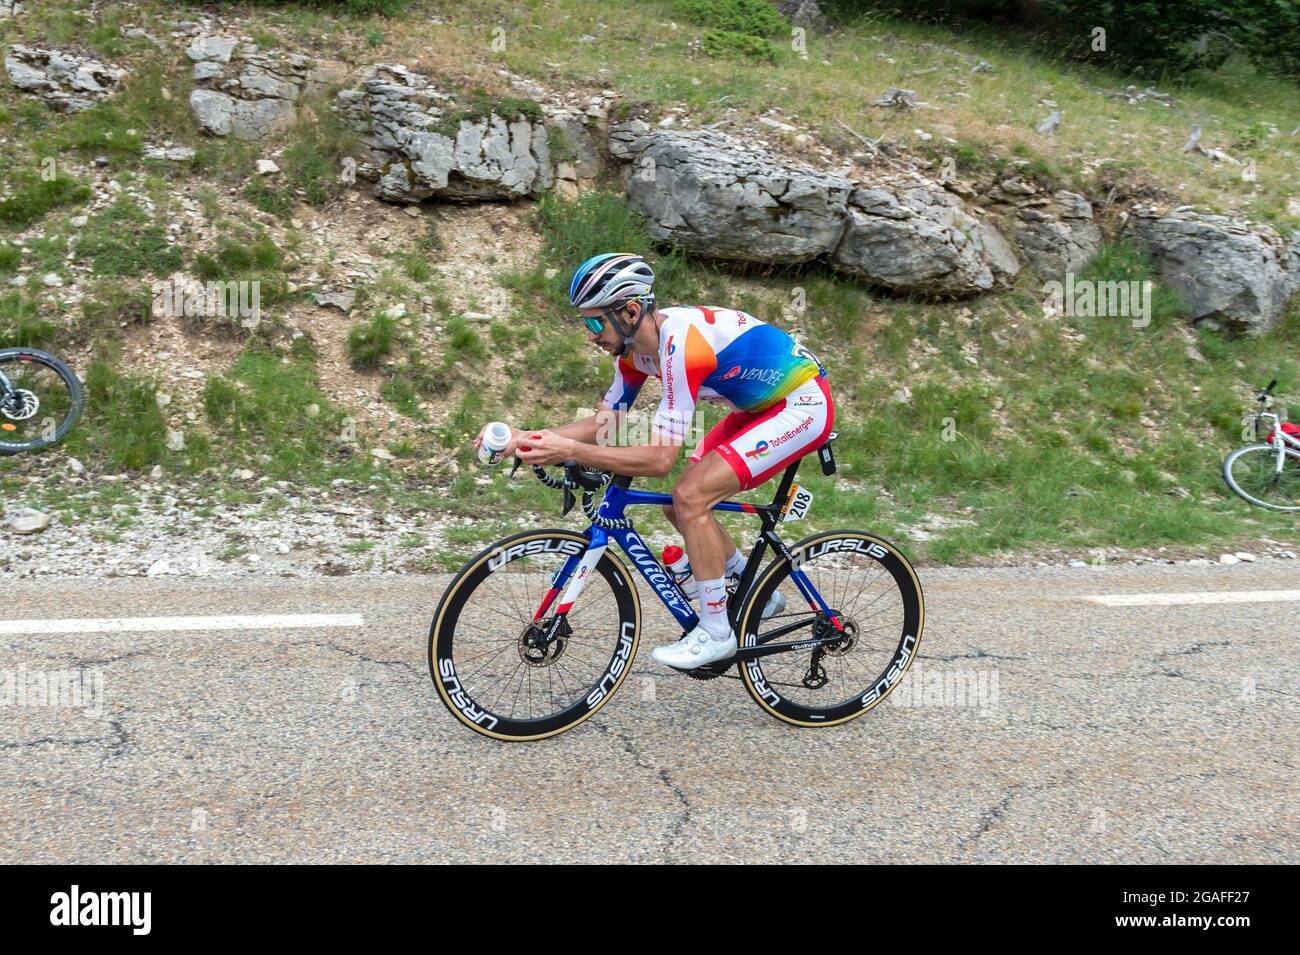 Malaucene, France. 07th July, 2021. Anthony Turgis (team TotalEnergies) in action during the 11th stage of 2021 Tour de France.The 11th stage of the Tour de France 2021 takes place between Sorgues and Malaucene and includes two ascents of Mont-Ventoux . The winner of the stage is Wout van Aert (Jumbo Visma team) and the final winner of the general classification of the 2021 Tour de France is the Slovenian rider of the UAE Team Emirates Tadej Pogacar. (Photo by Laurent Coust/SOPA Images/Sipa USA) Credit: Sipa USA/Alamy Live News Stock Photo